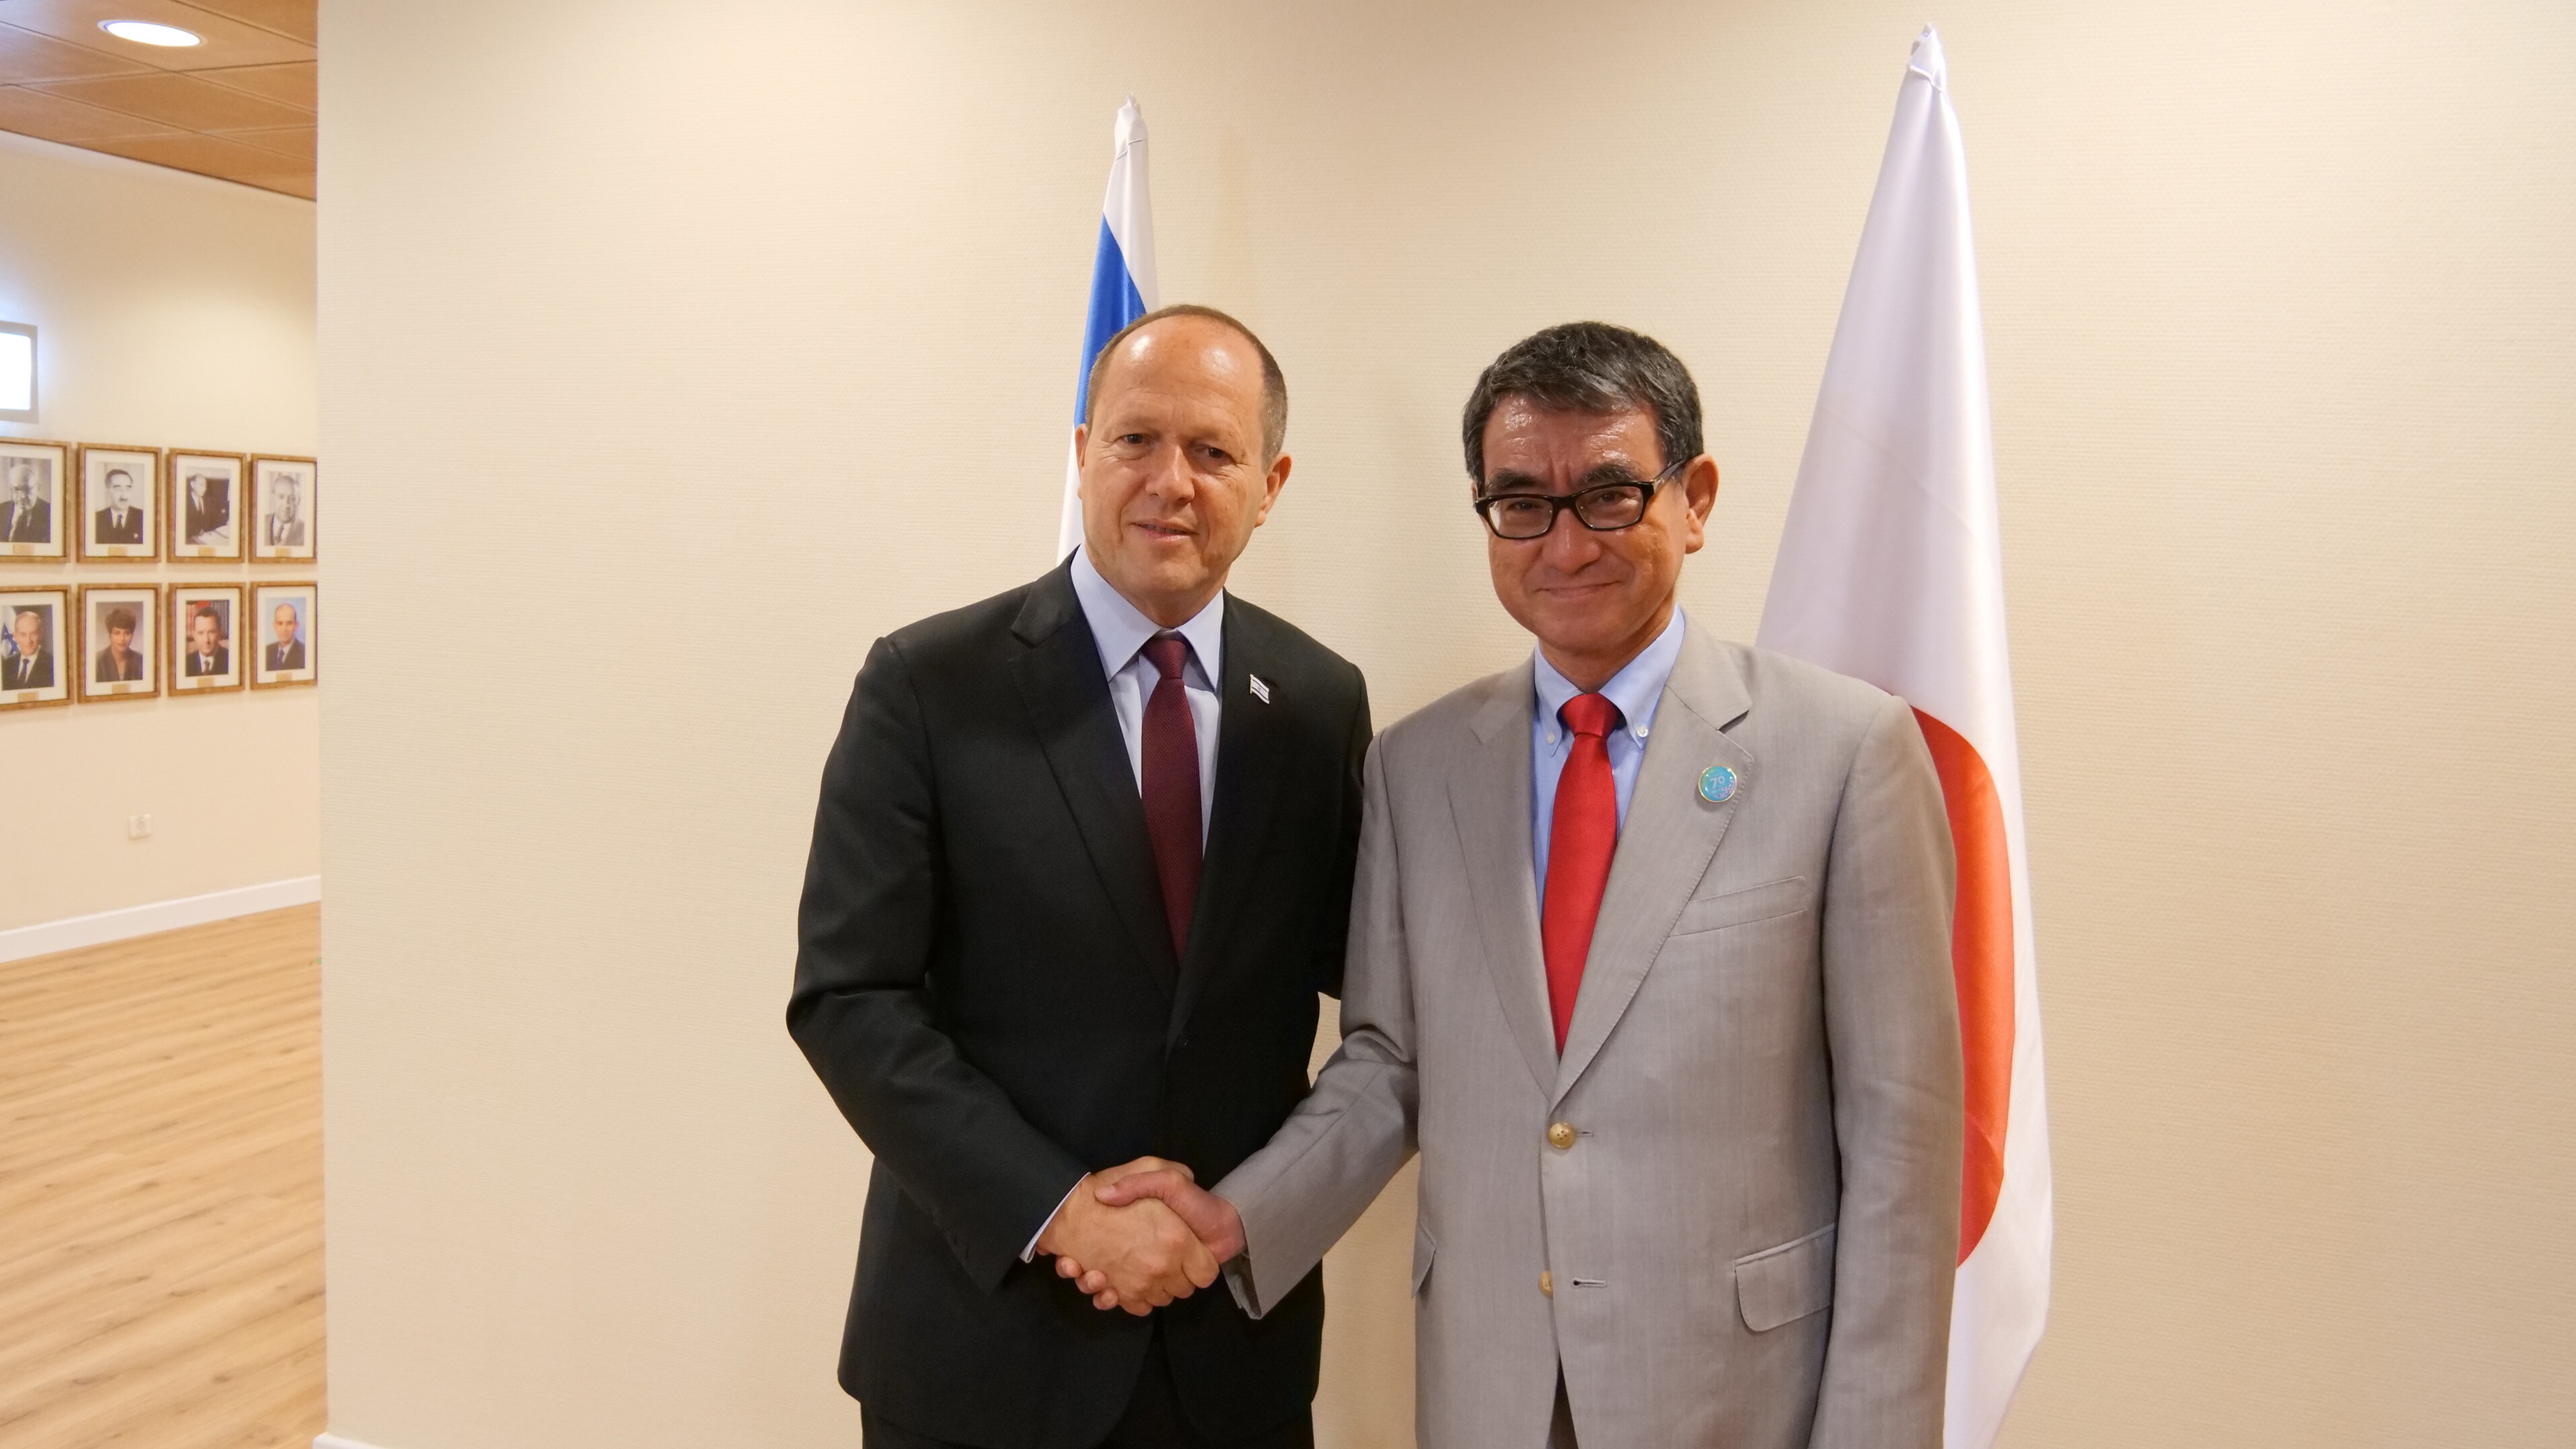 Minister Kono (right) shaking hand with Minister Barkat (left).